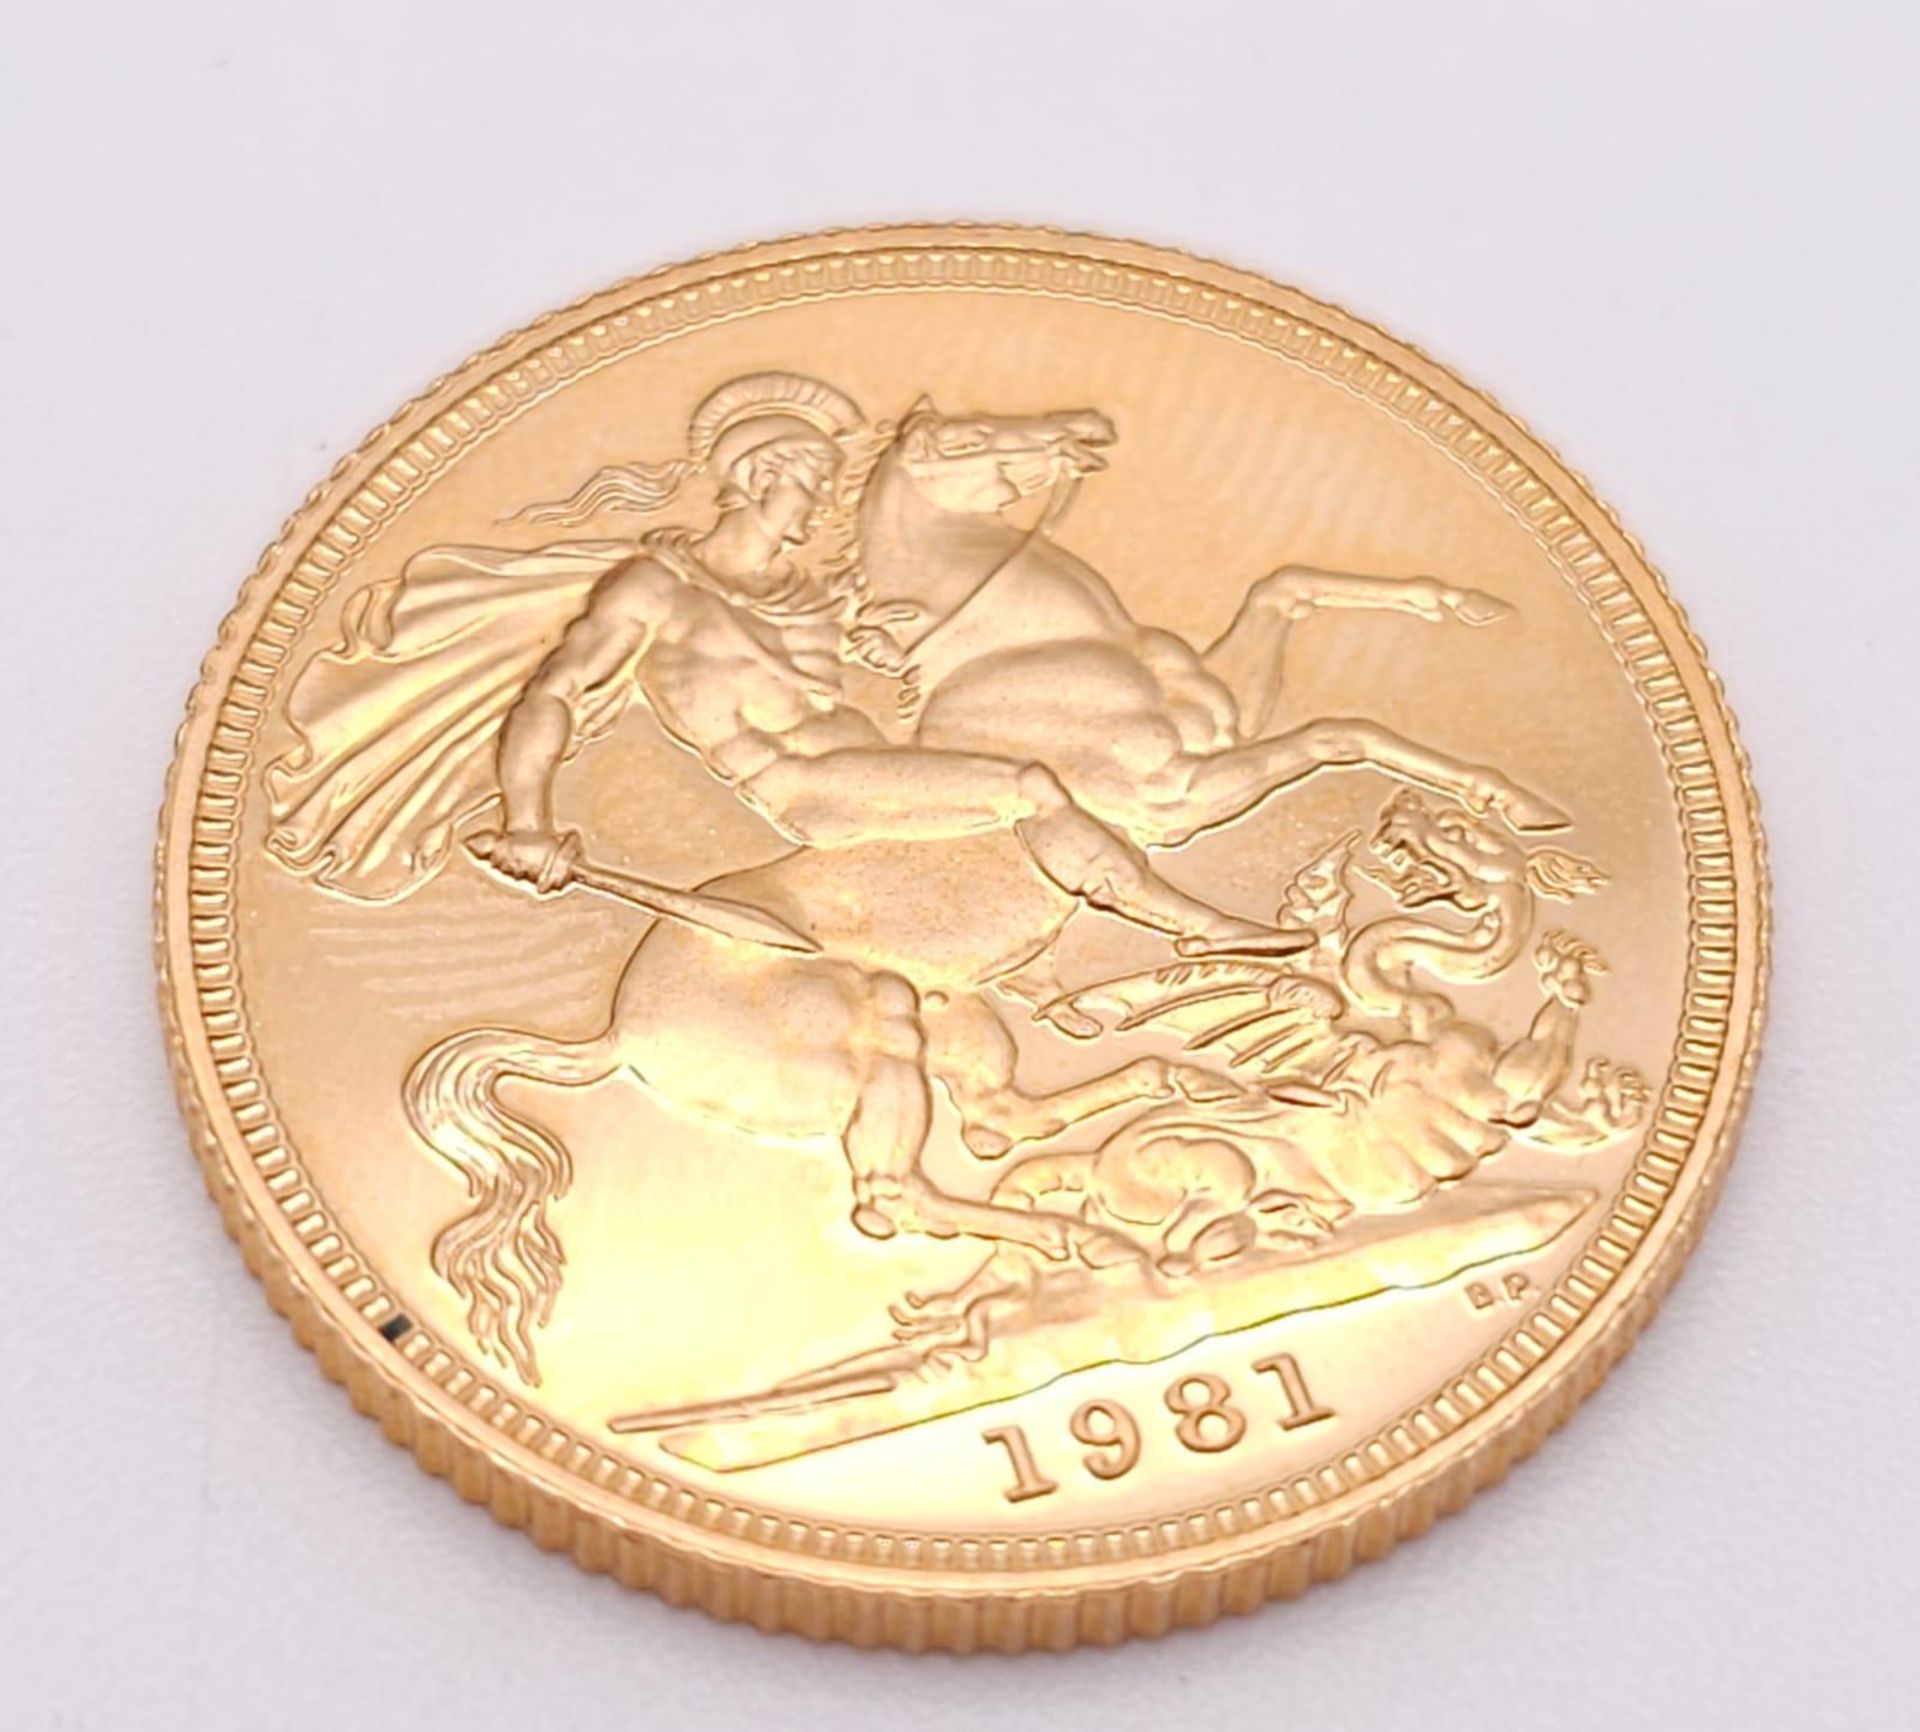 A 22K GOLD SOVEREIGN DATED 1981 IN CAPSULE AS NEW. - Image 3 of 5